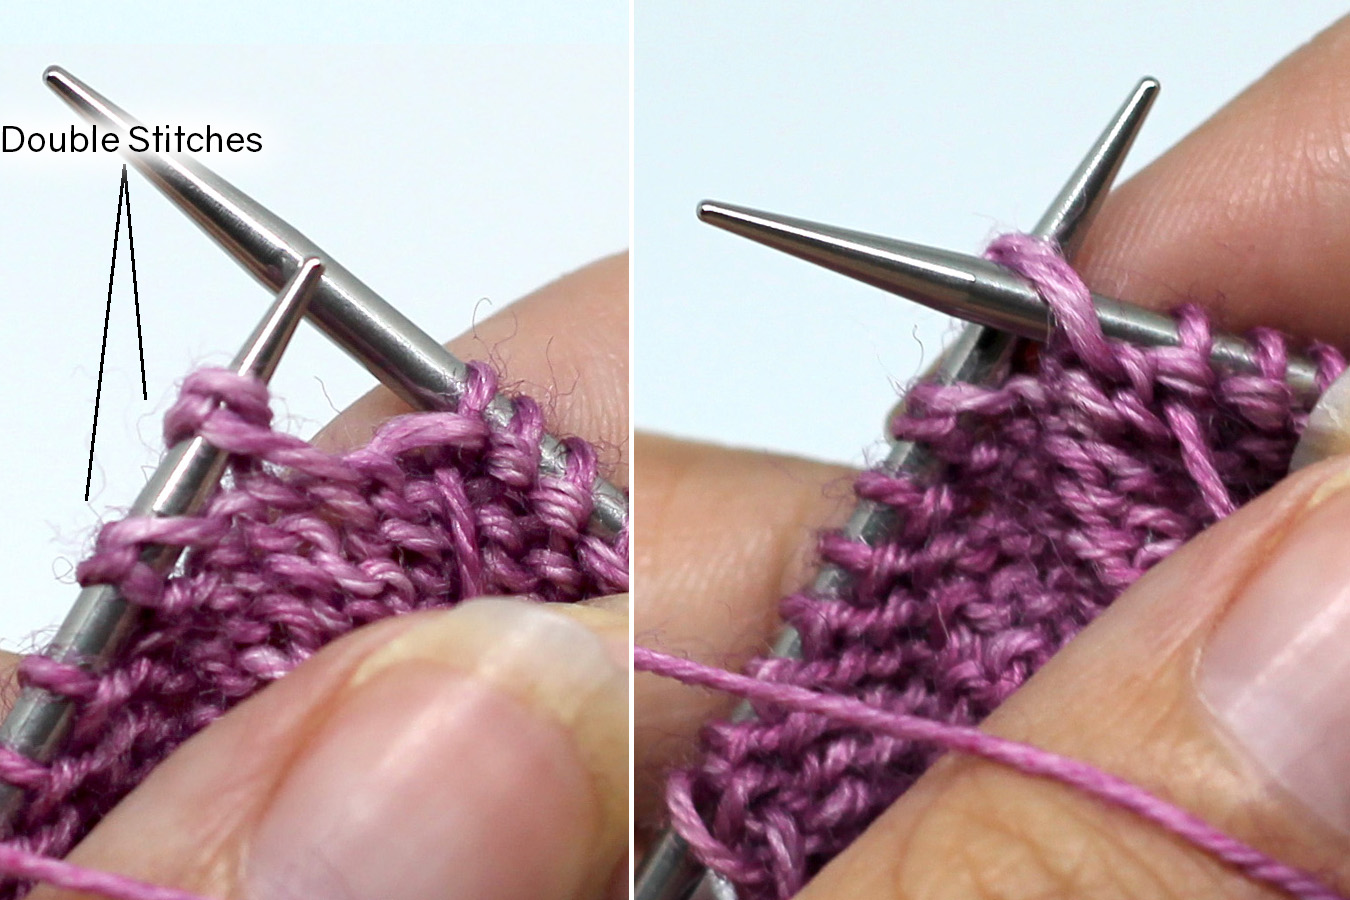 Two images showing the purl side of a piece of knitting. Left image: The double stitch formed in step 6 is on the left-hand needle. Right Image - The double stitch is being worked with both legs at once, like a p2tog